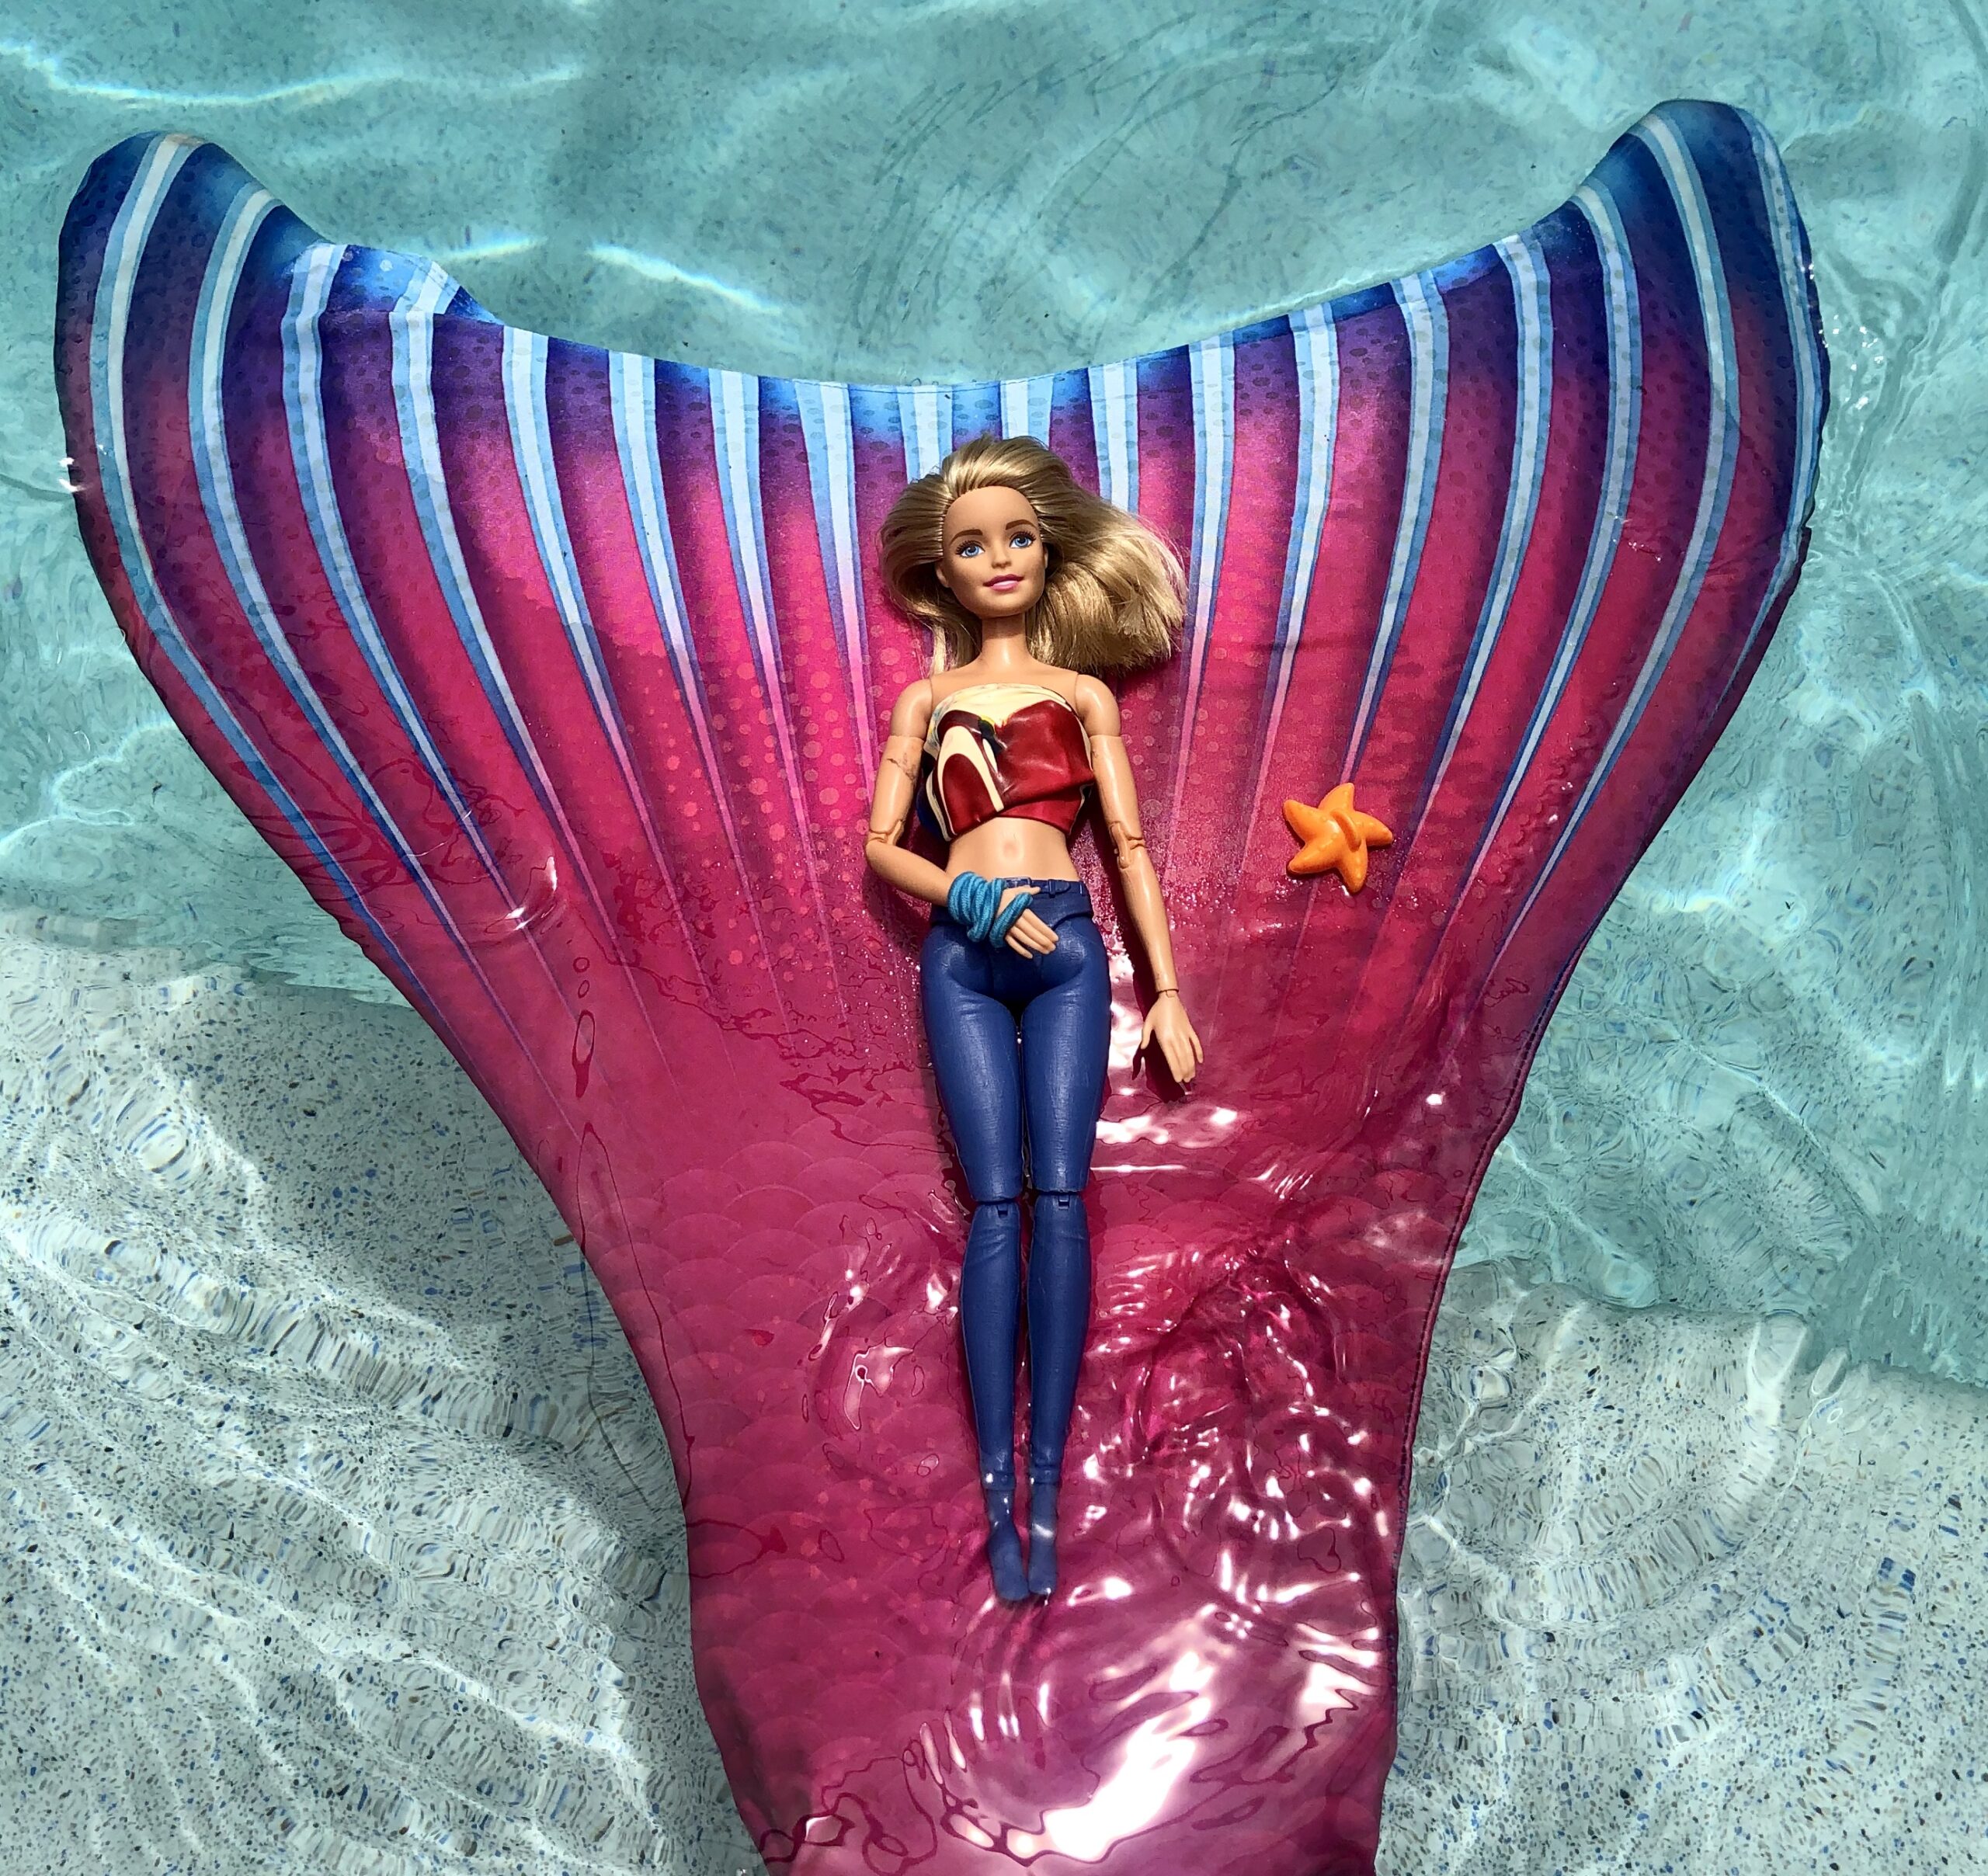 A Barbie Doll laying on a bright colored mermaid raft.